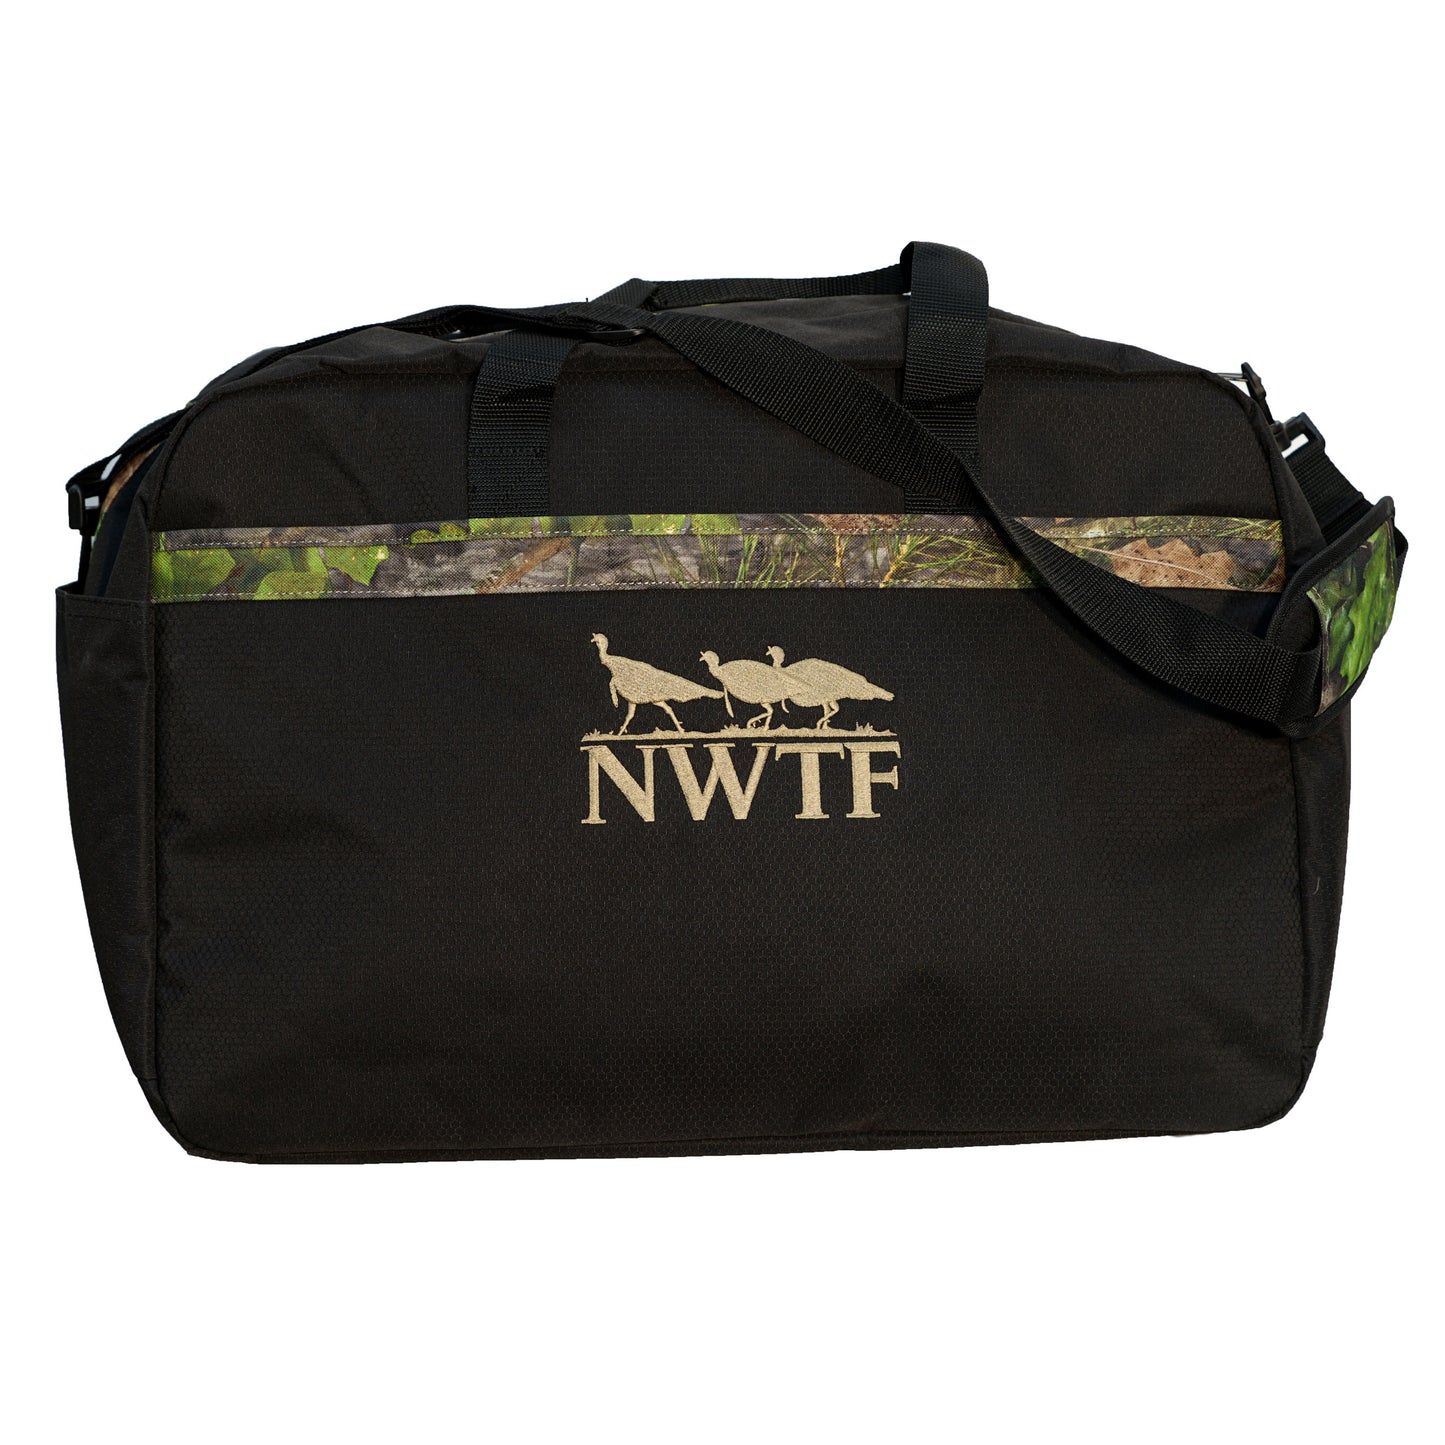 NWTF Carry-On Duffel